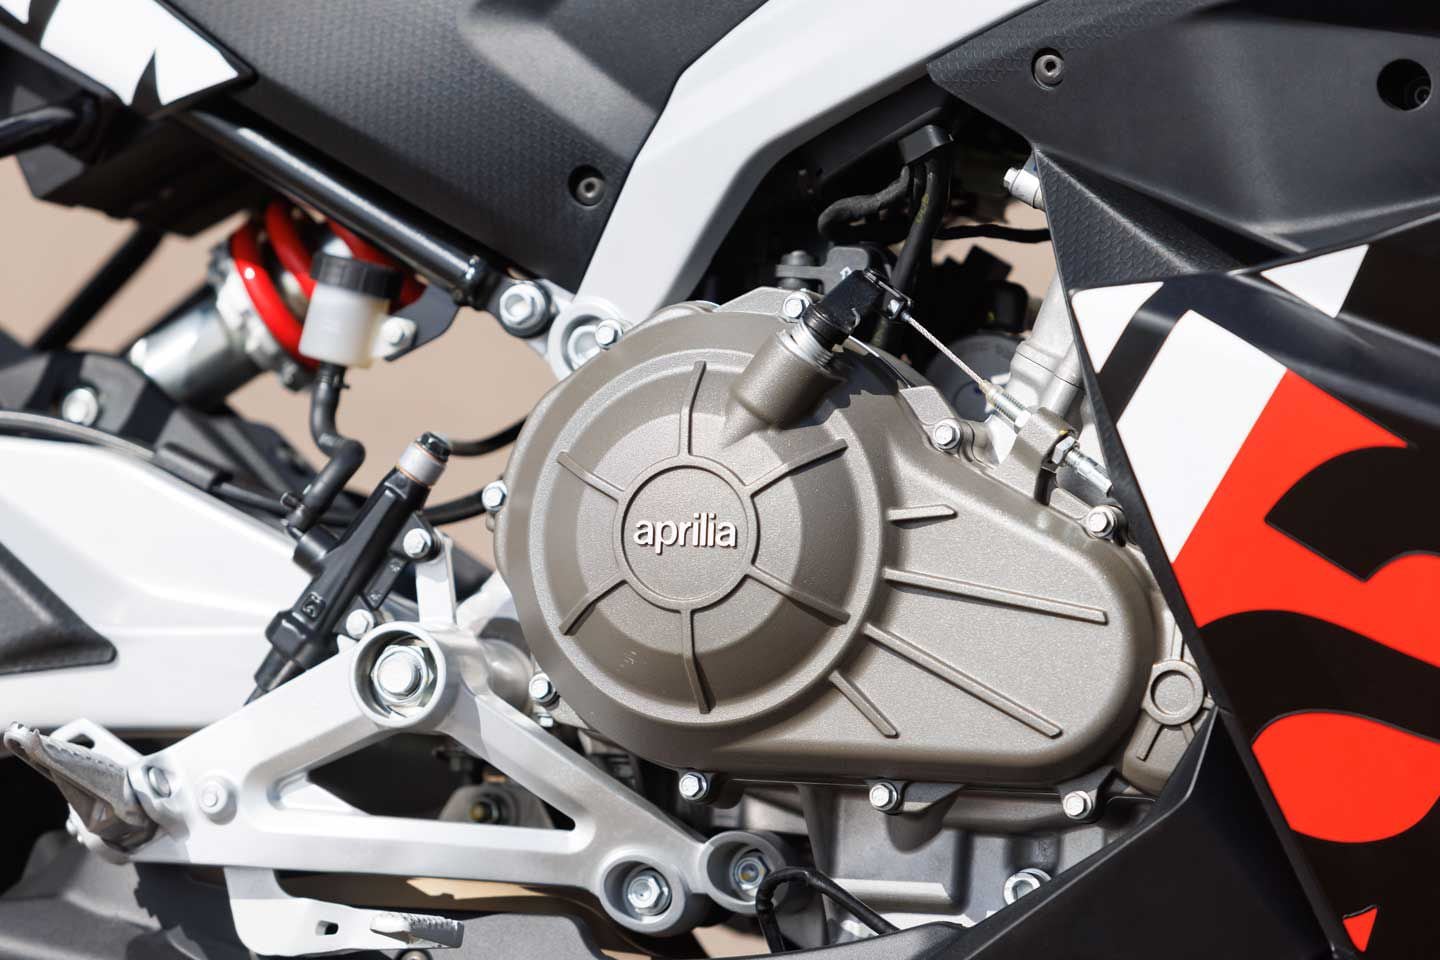 Aprilia’s newest offering utilizes a 457cc parallel twin with a 270-degree crank, making a claimed 48 hp and 32 lb.-ft. of torque.